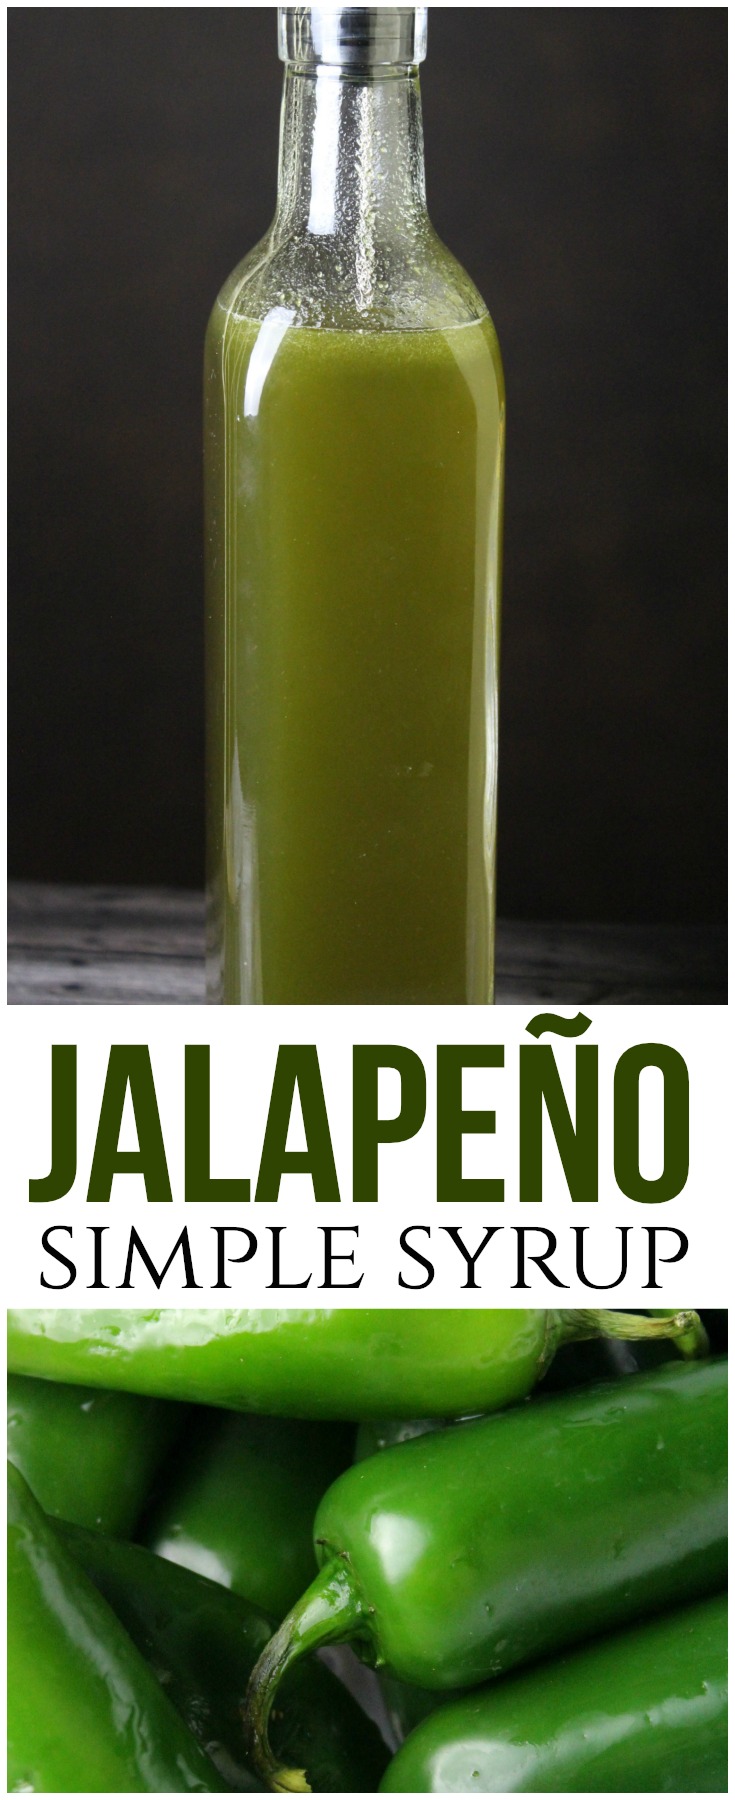 Jalapeño simple syrup is both spicy and sweet and the key to an amazing margarita!  It's easy to make at home with just two key  ingredients! #simplesyrup #jalapeno #spicy #margarita #jalapenopepper